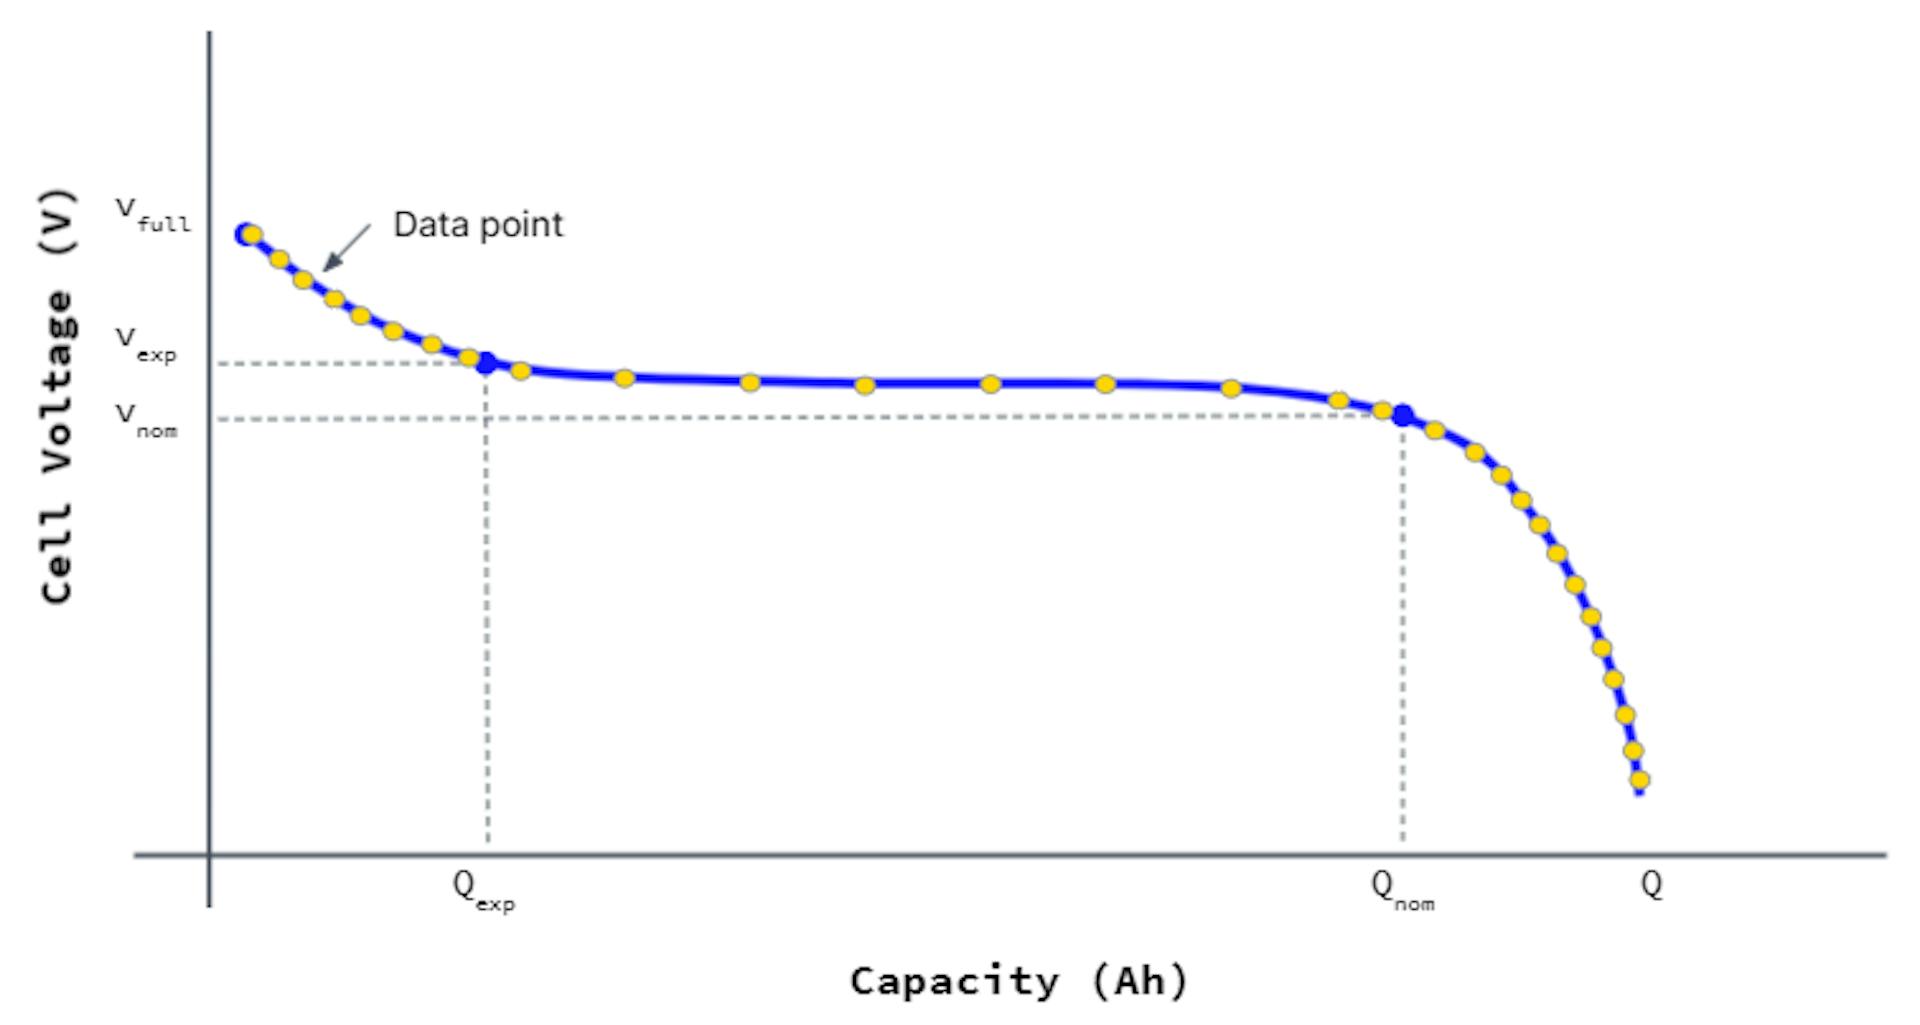 Example battery discharge curve with data points superimposed to depict rapid sampling during the interesting bits and slower sampling during the boring bits.